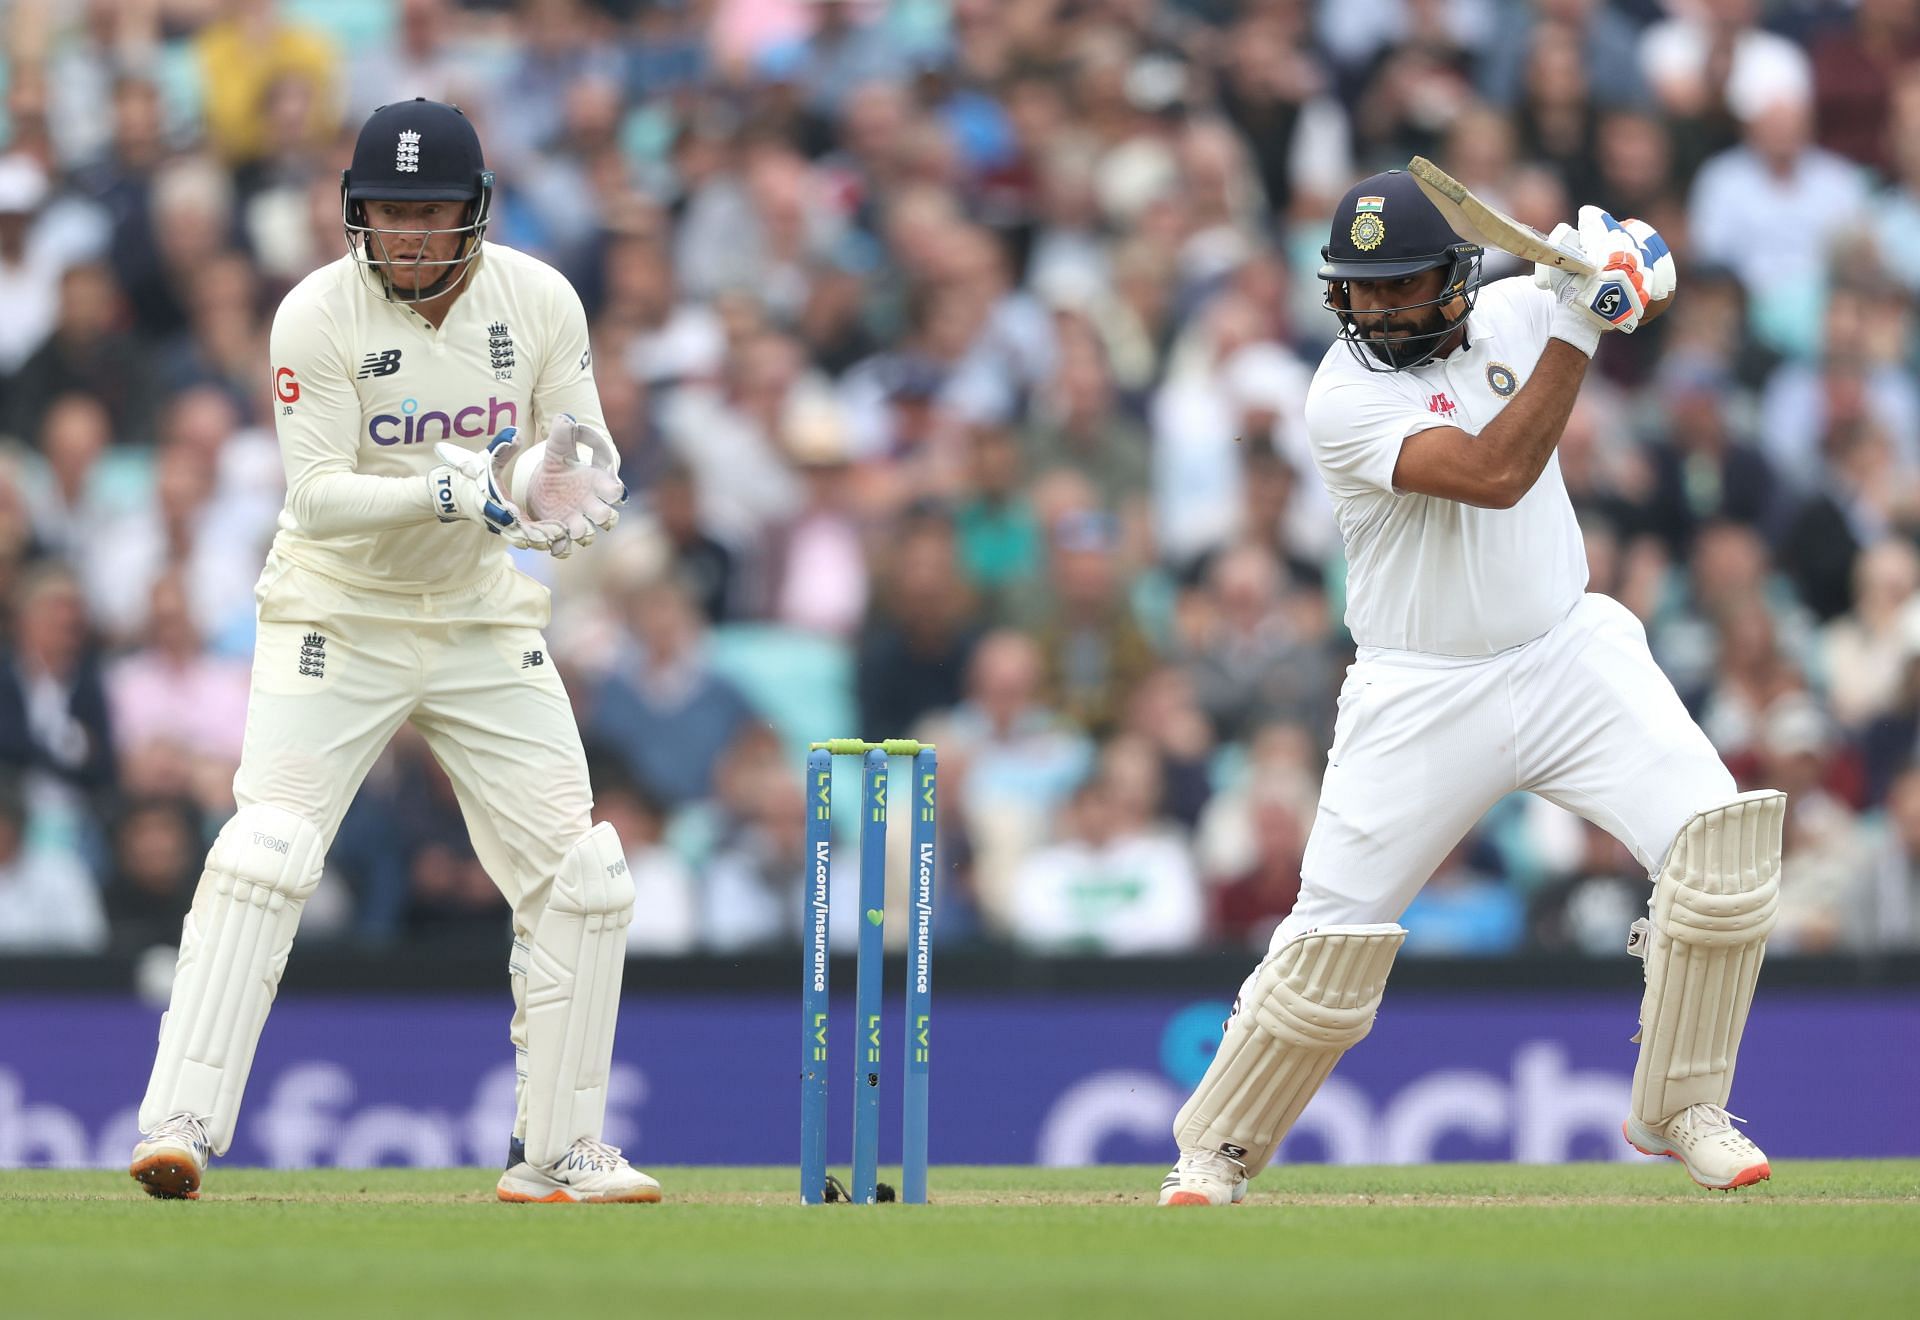 Team India will hope to win the remaining Test in England